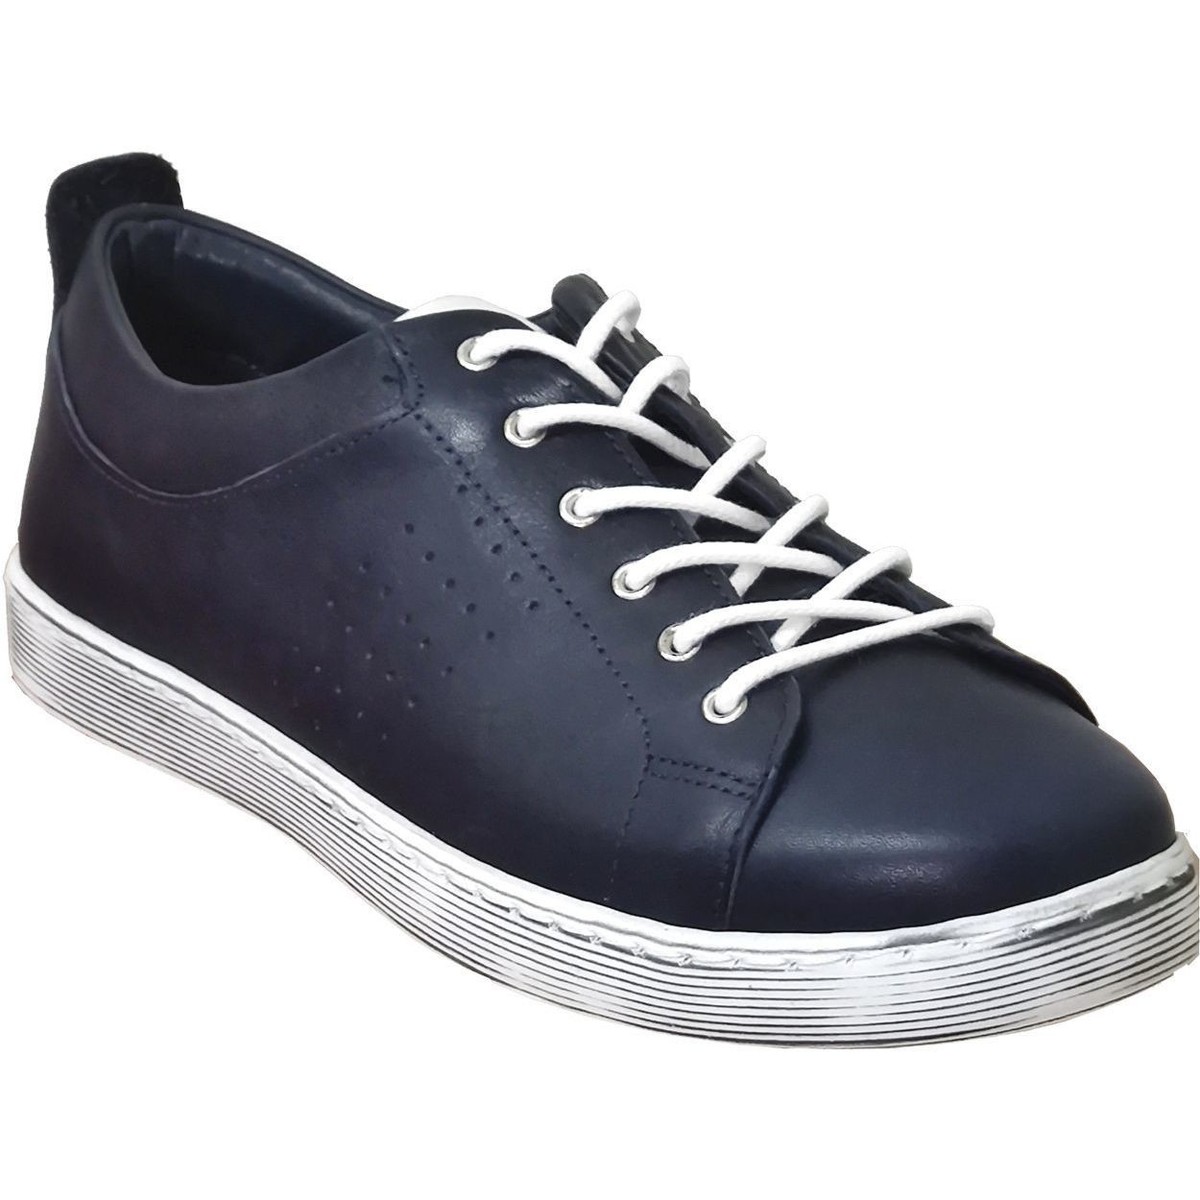 Xαμηλά Sneakers K.mary Absolut Δέρμα